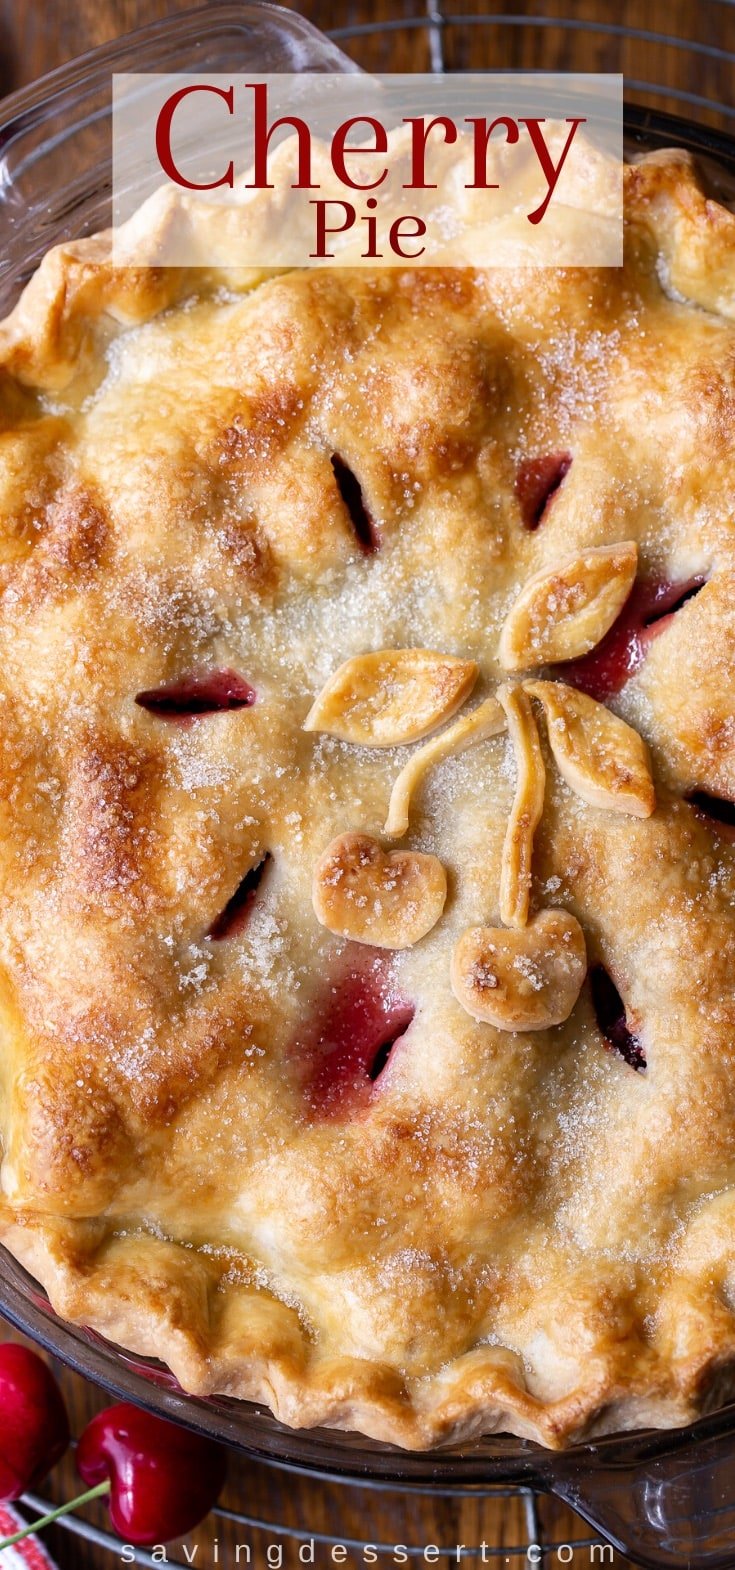 A closeup of a baked pie with a golden brown top crust decorated with pastry cut-outs in the shape of cherries and leaves